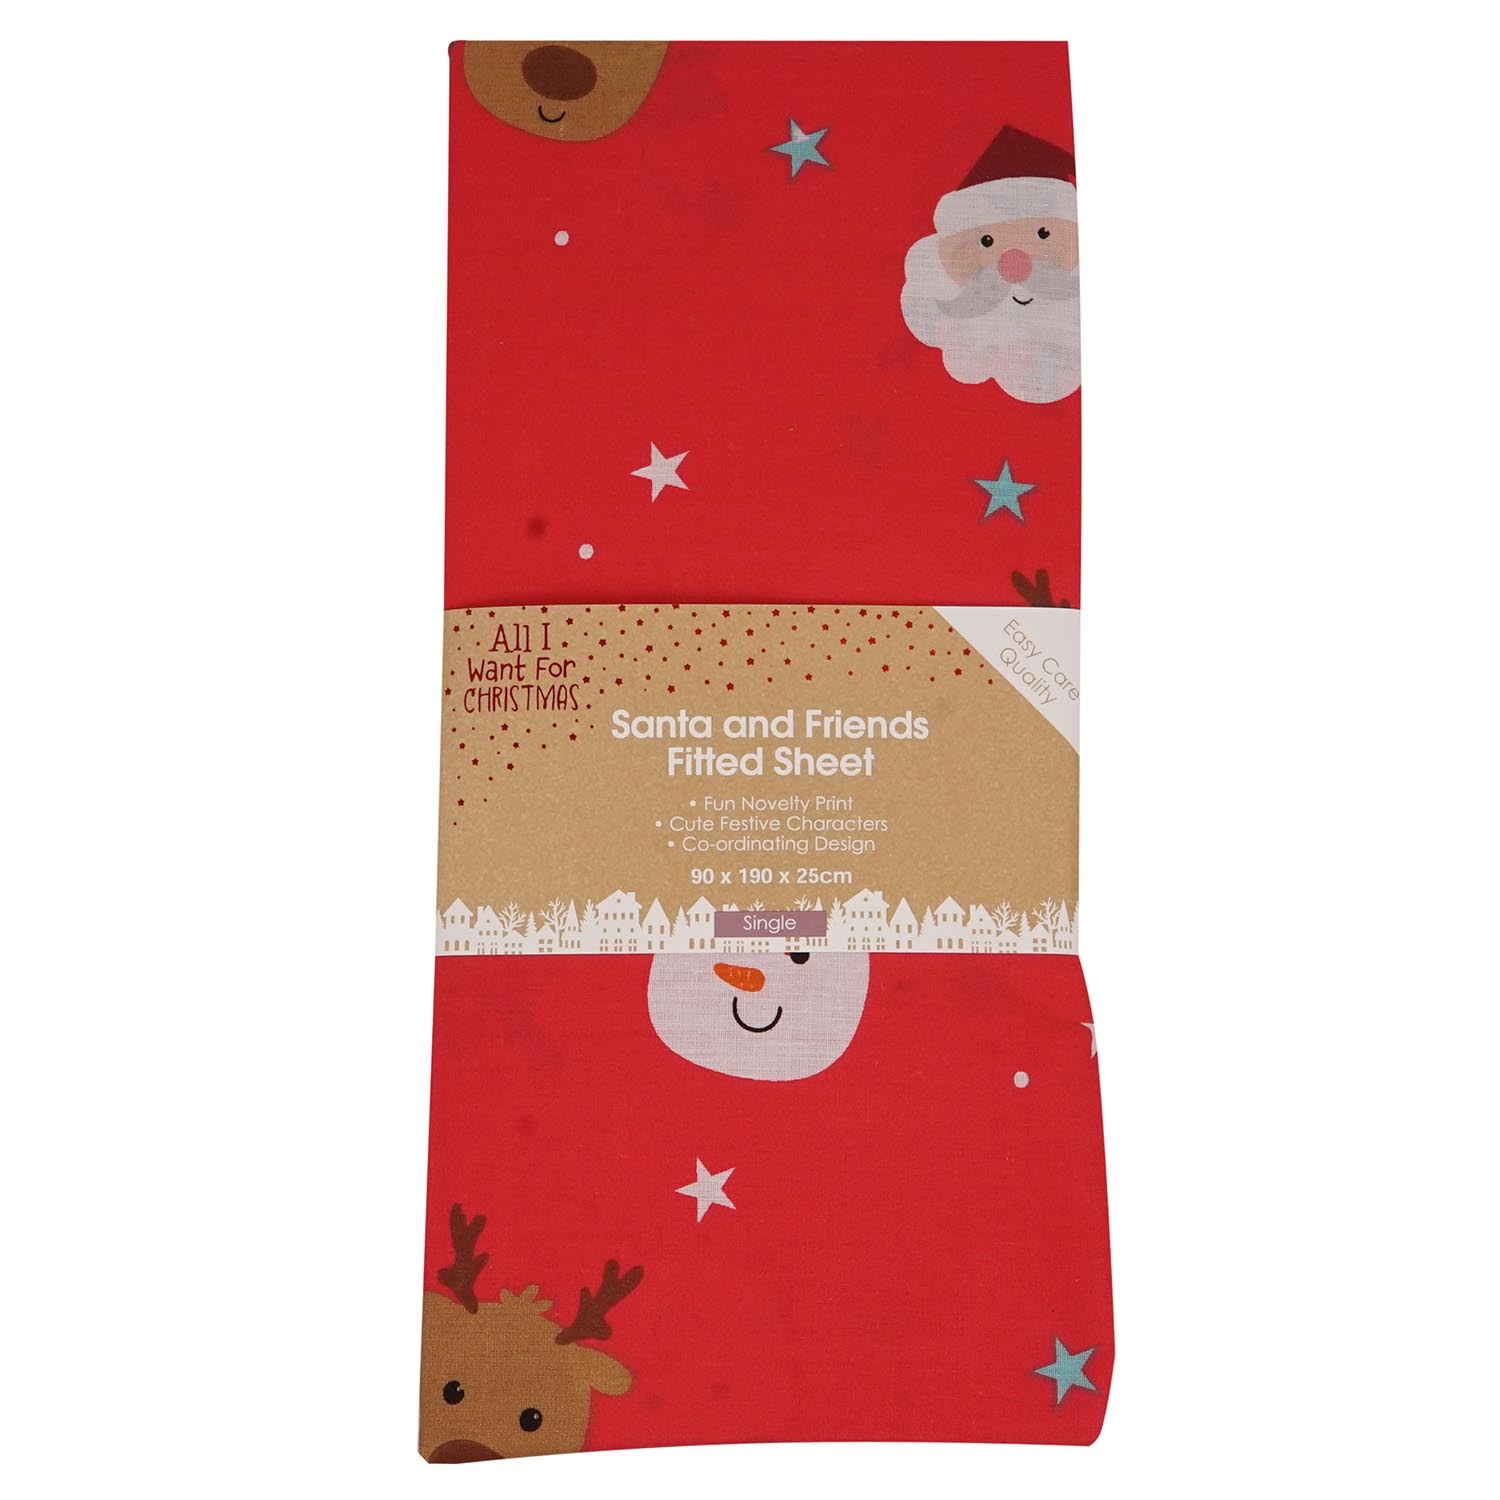 Santa and Friends Fitted Sheet - Red Image 1